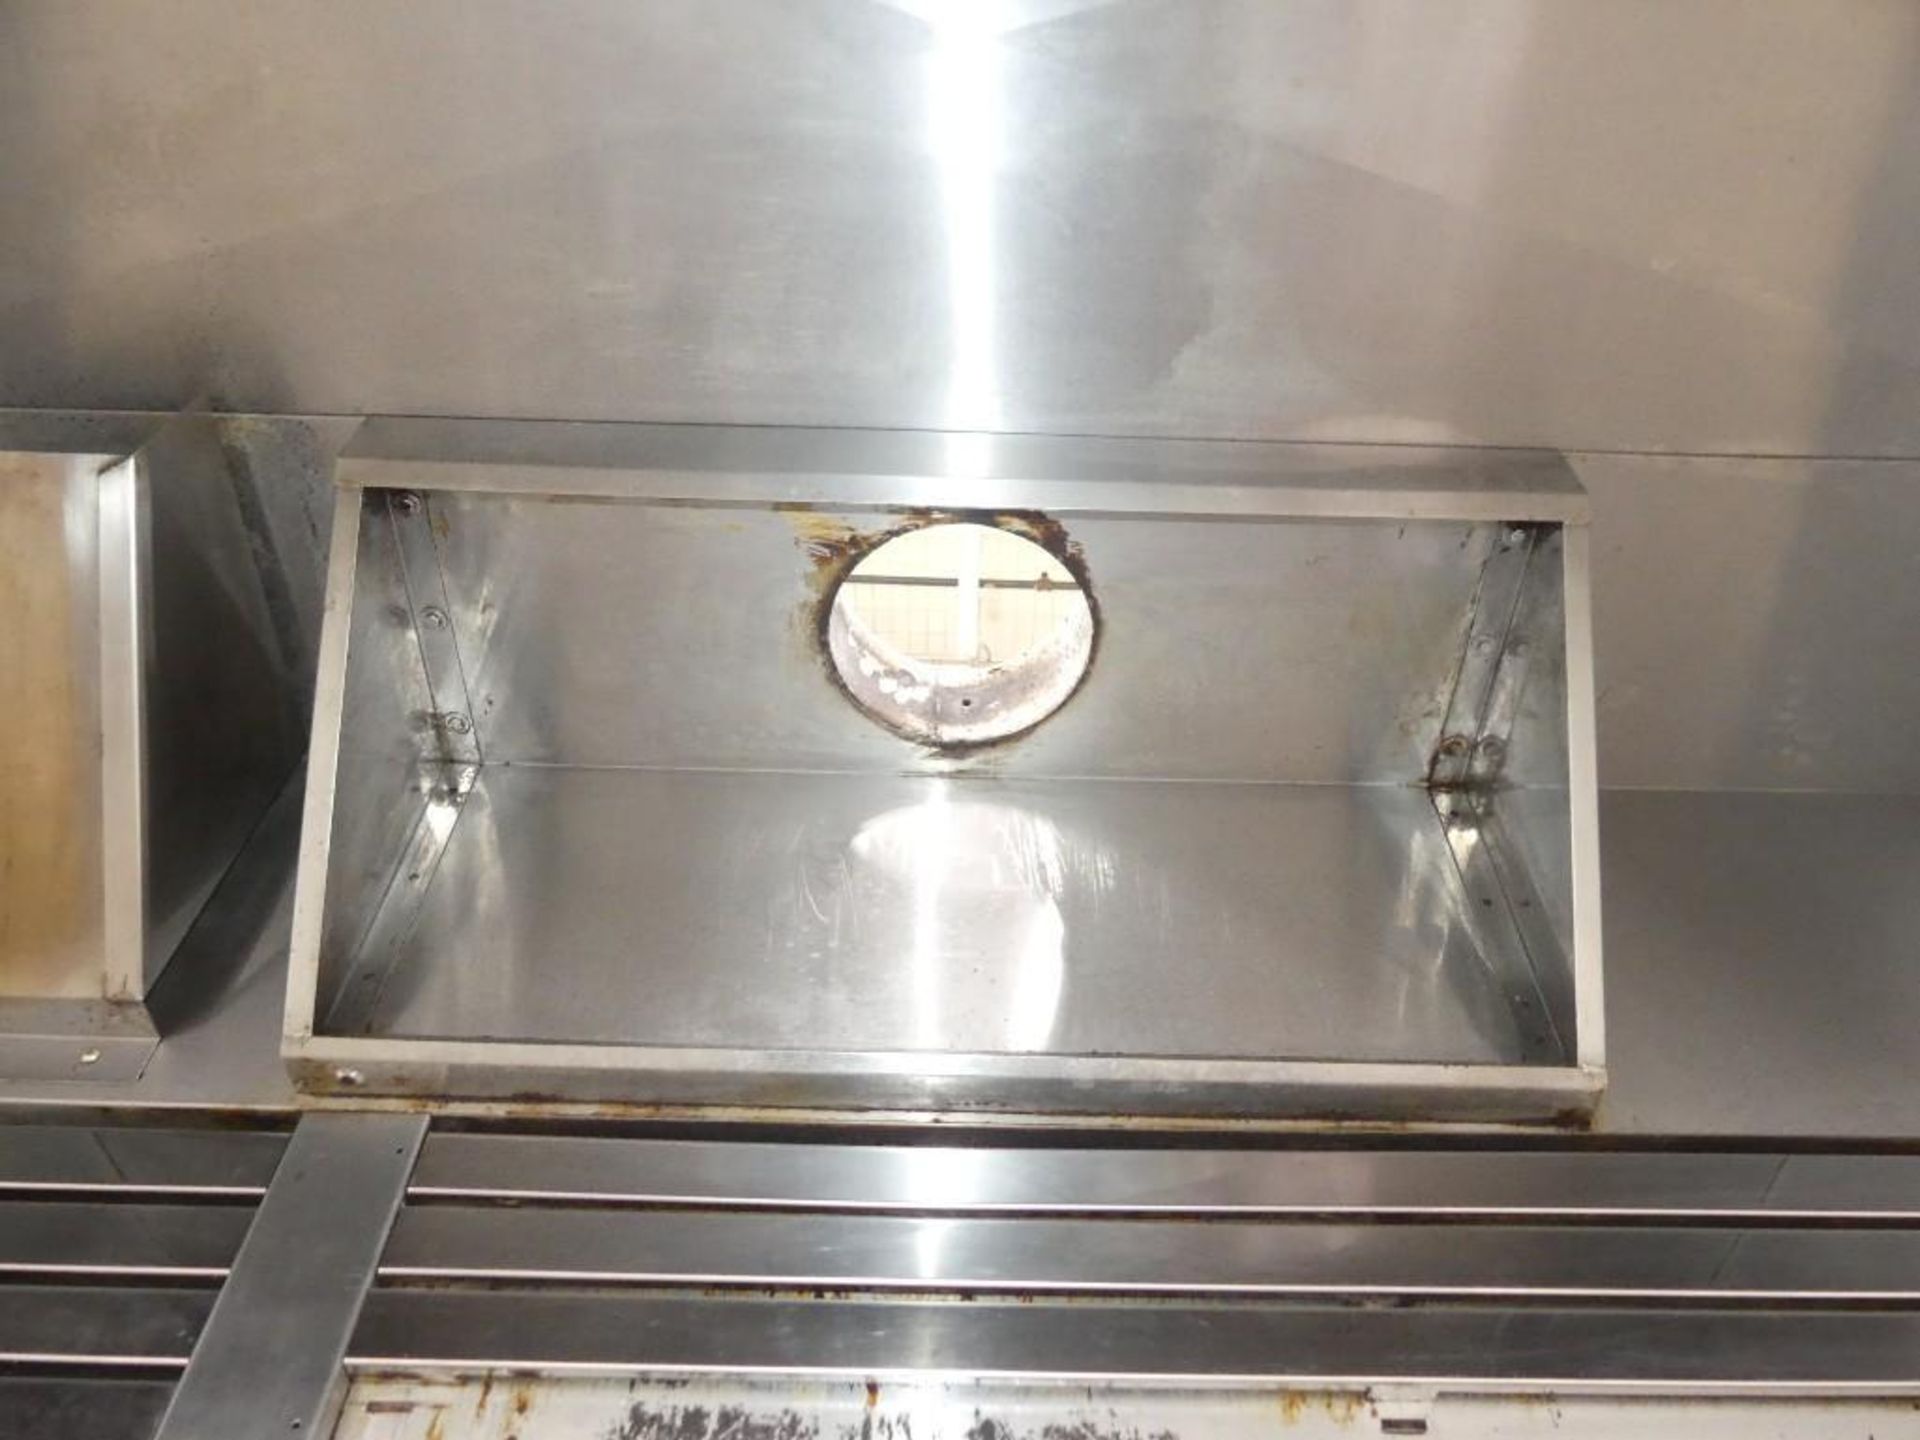 LBC LRO-2G Double Rack Stainless Steel Gas Oven - Image 21 of 36